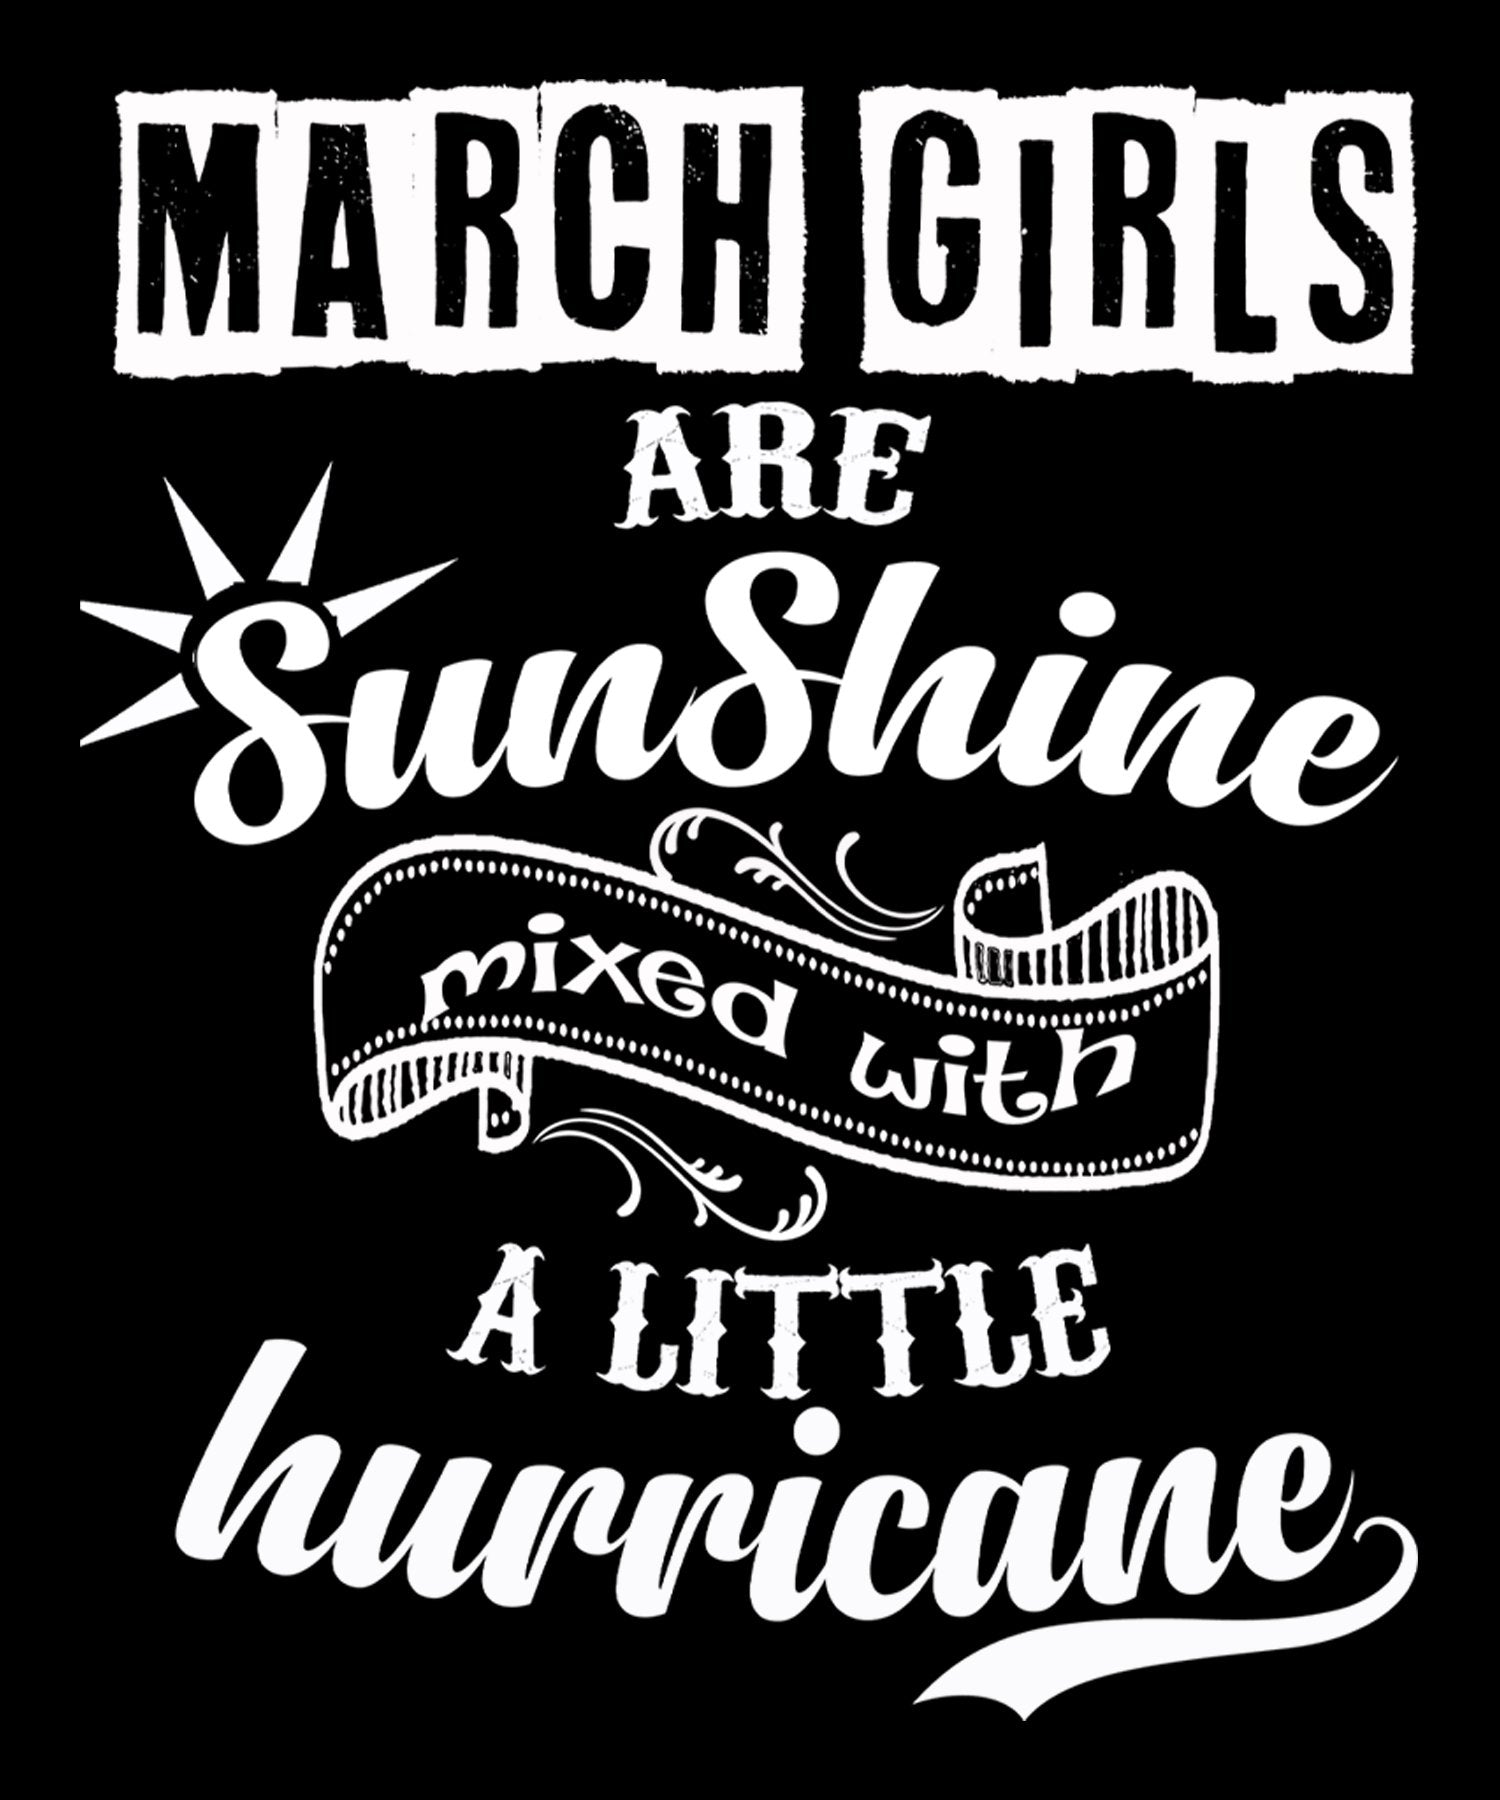 "March Girls Are Sunshine Mixed With Little Hurricane" TSHIRT